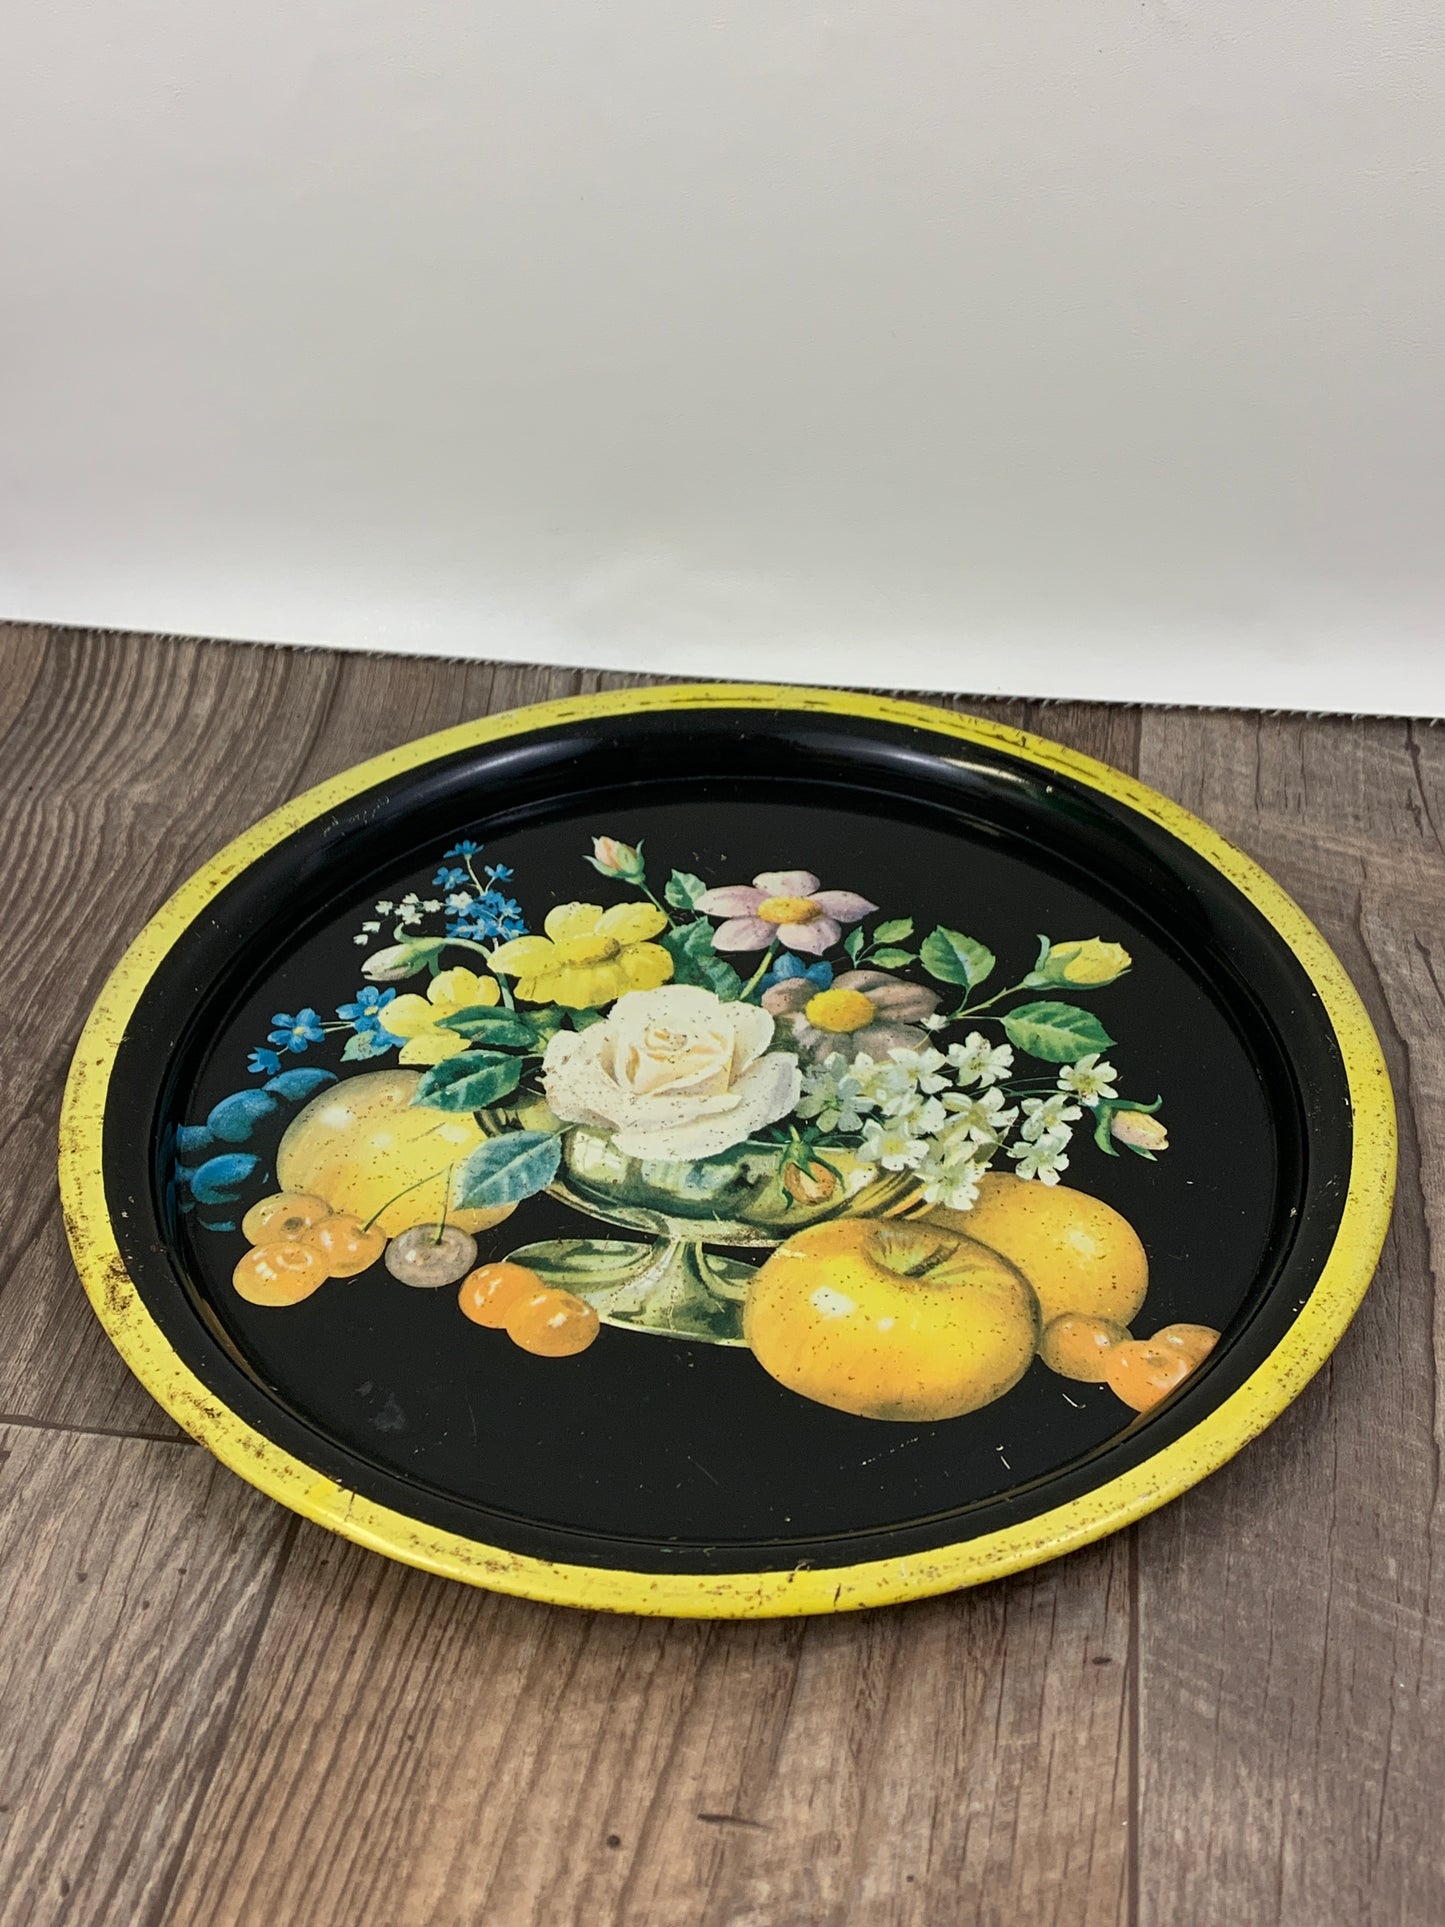 Vintage Round Tray with Floral Pattern Black and Yellow Tray Vintage Farmhouse Decor